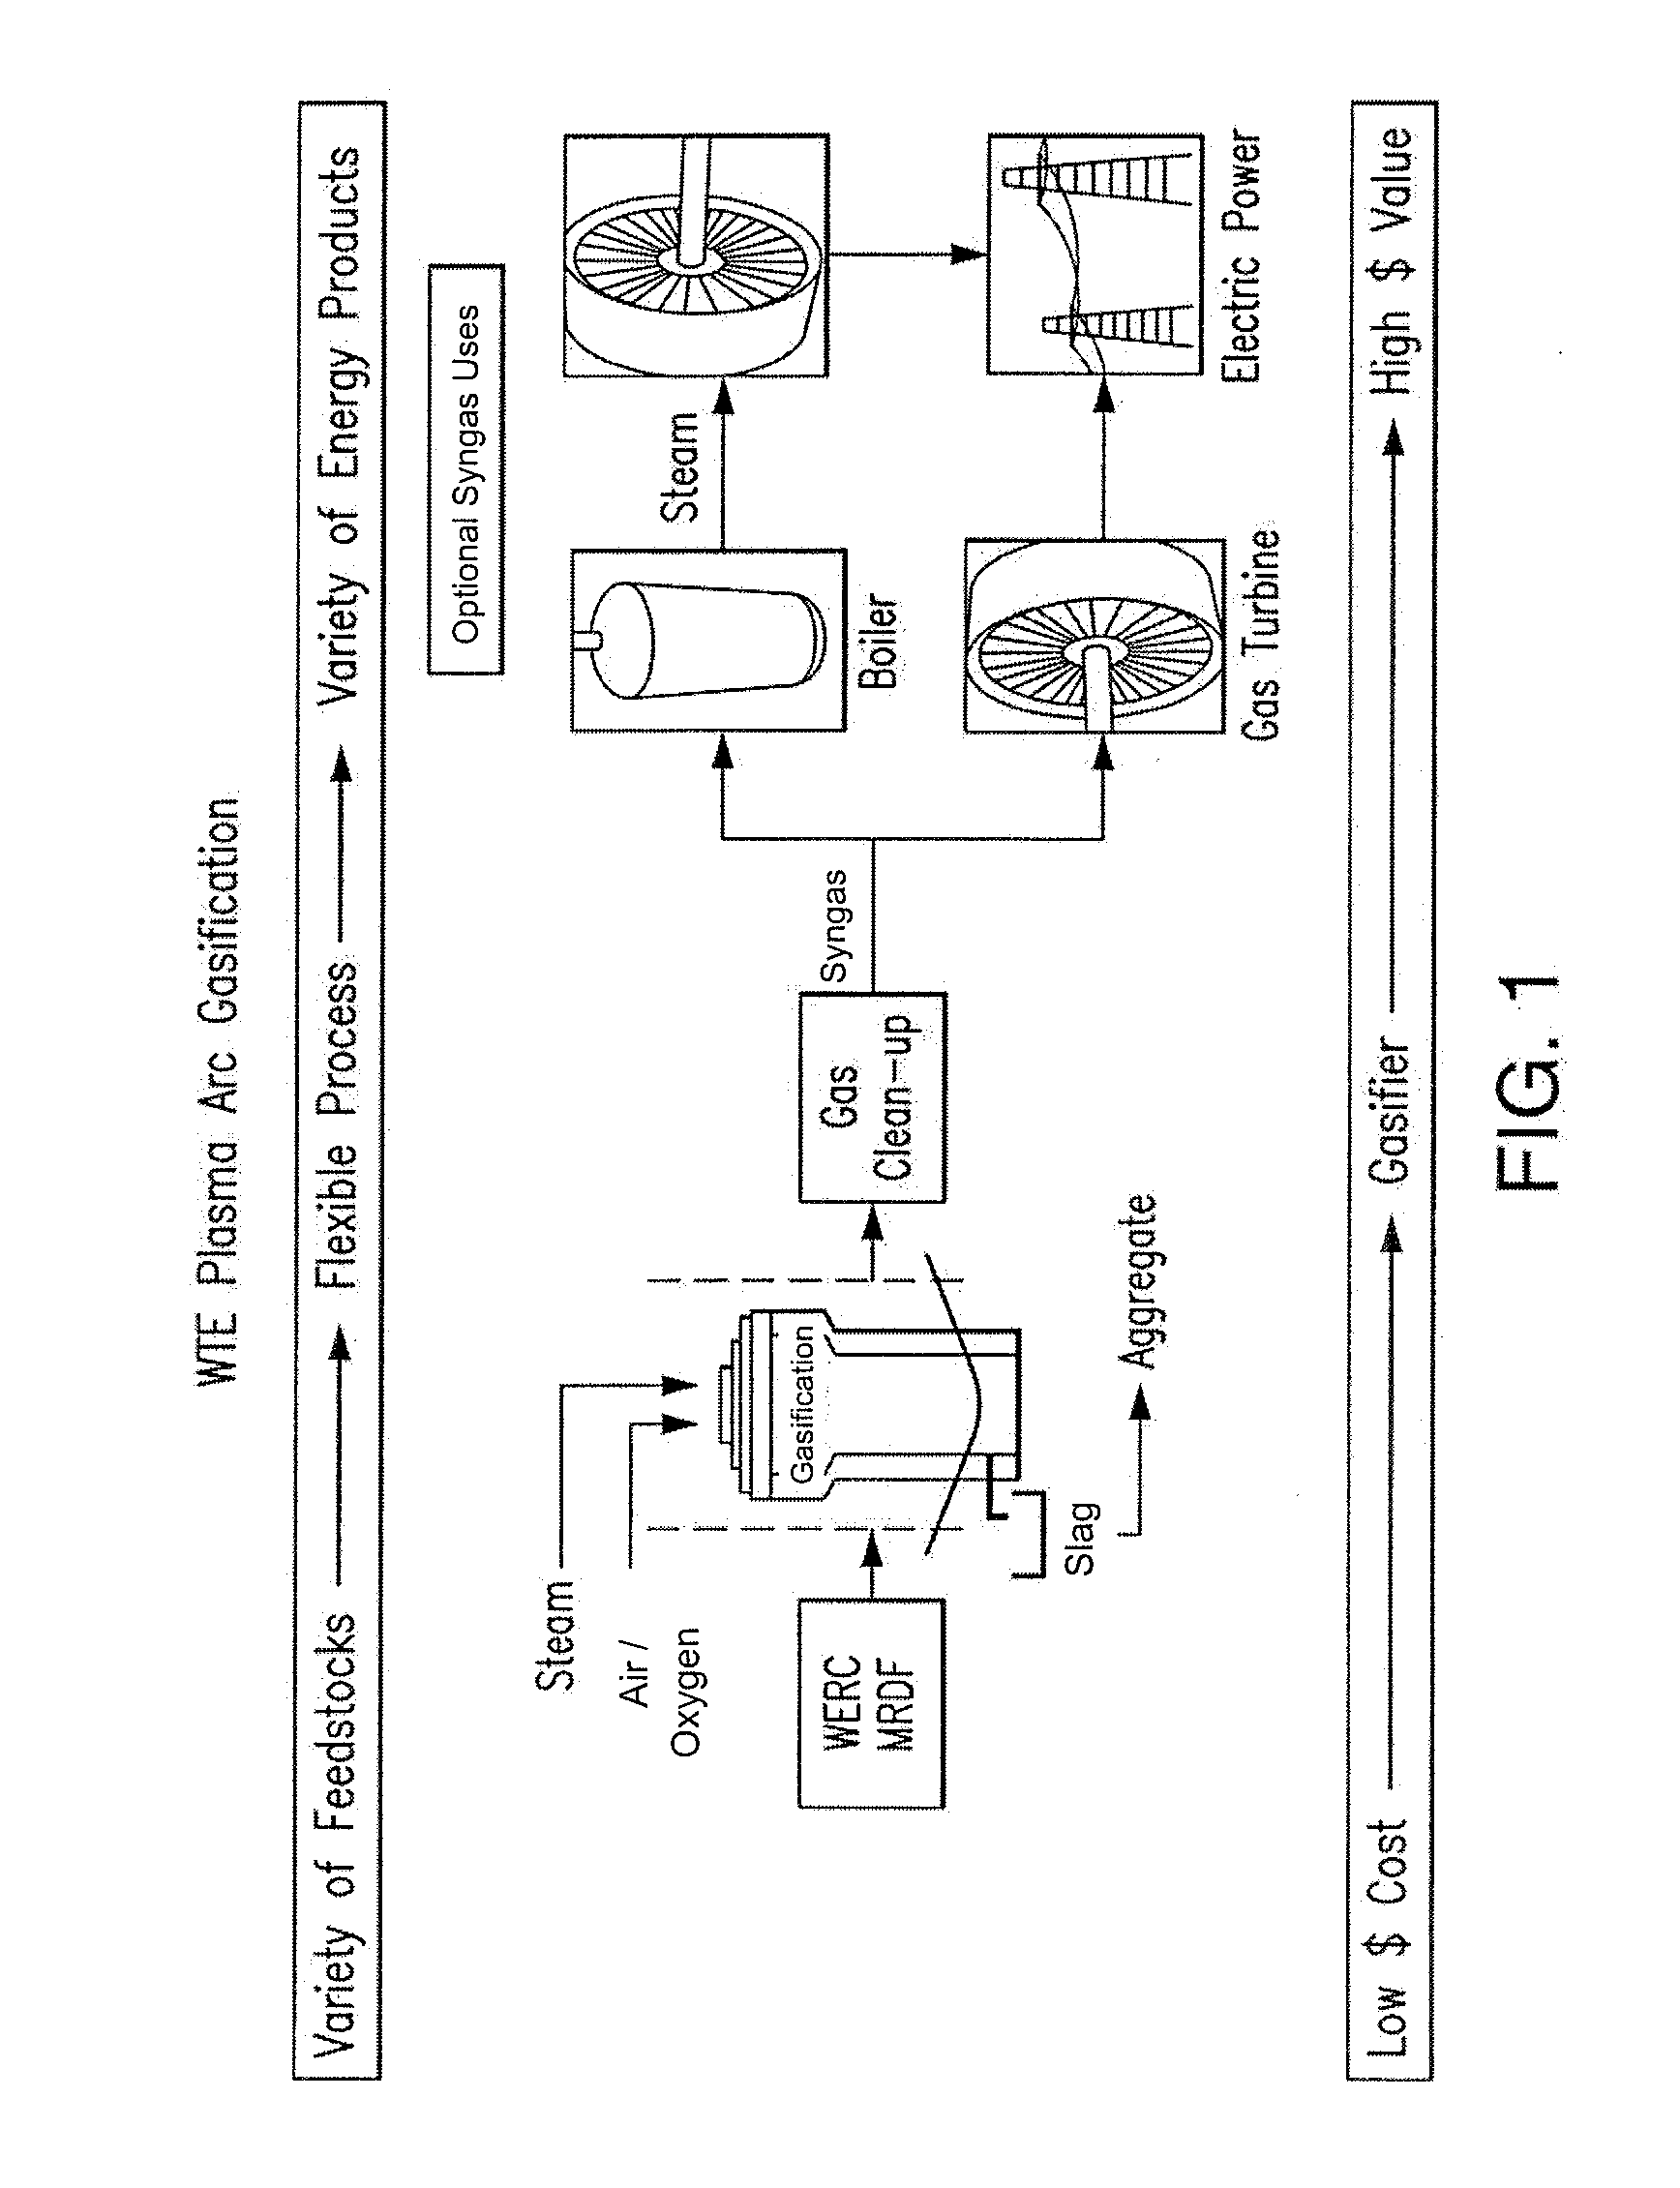 System and Method for Manufacturing Various Waste and Municipal Solid Waste for Producing a Solid Fuel